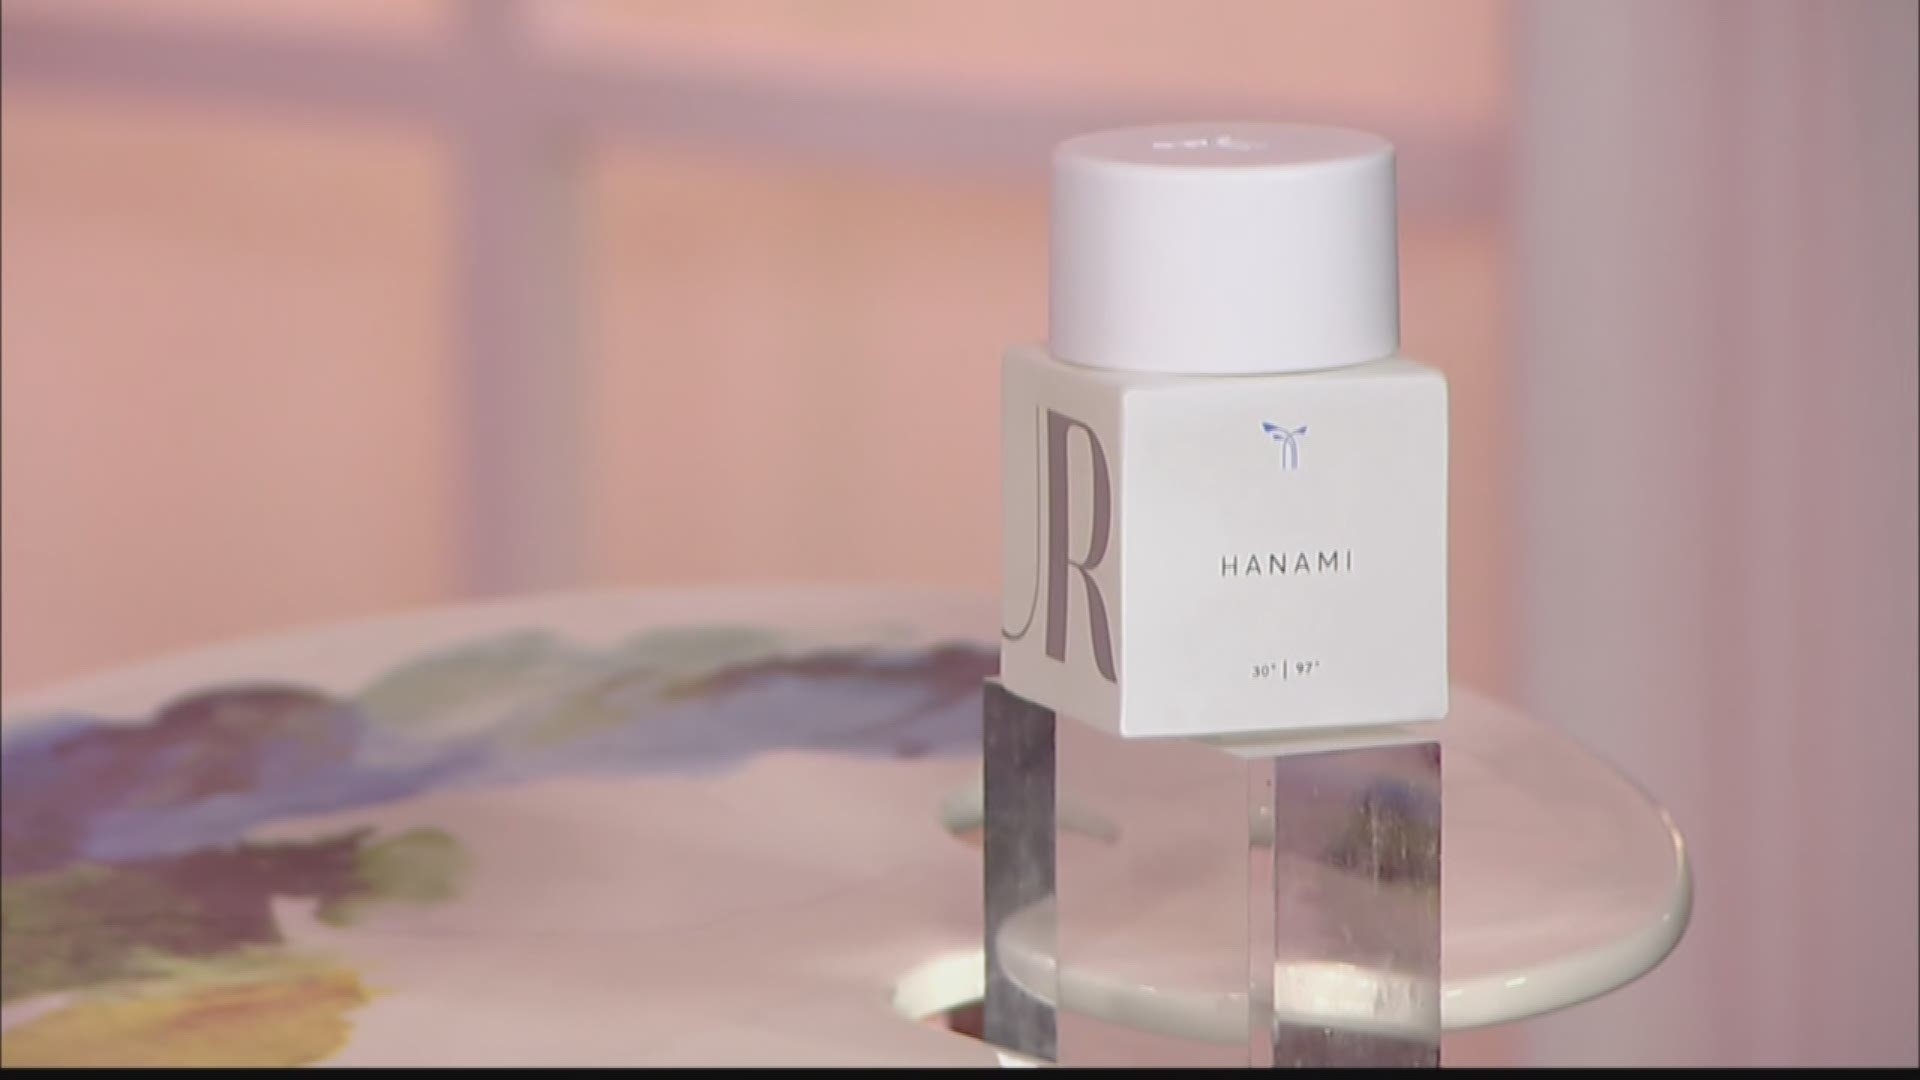 Fashion and beauty expert shares fragrance Mother's Day gift ideas that she'll love!